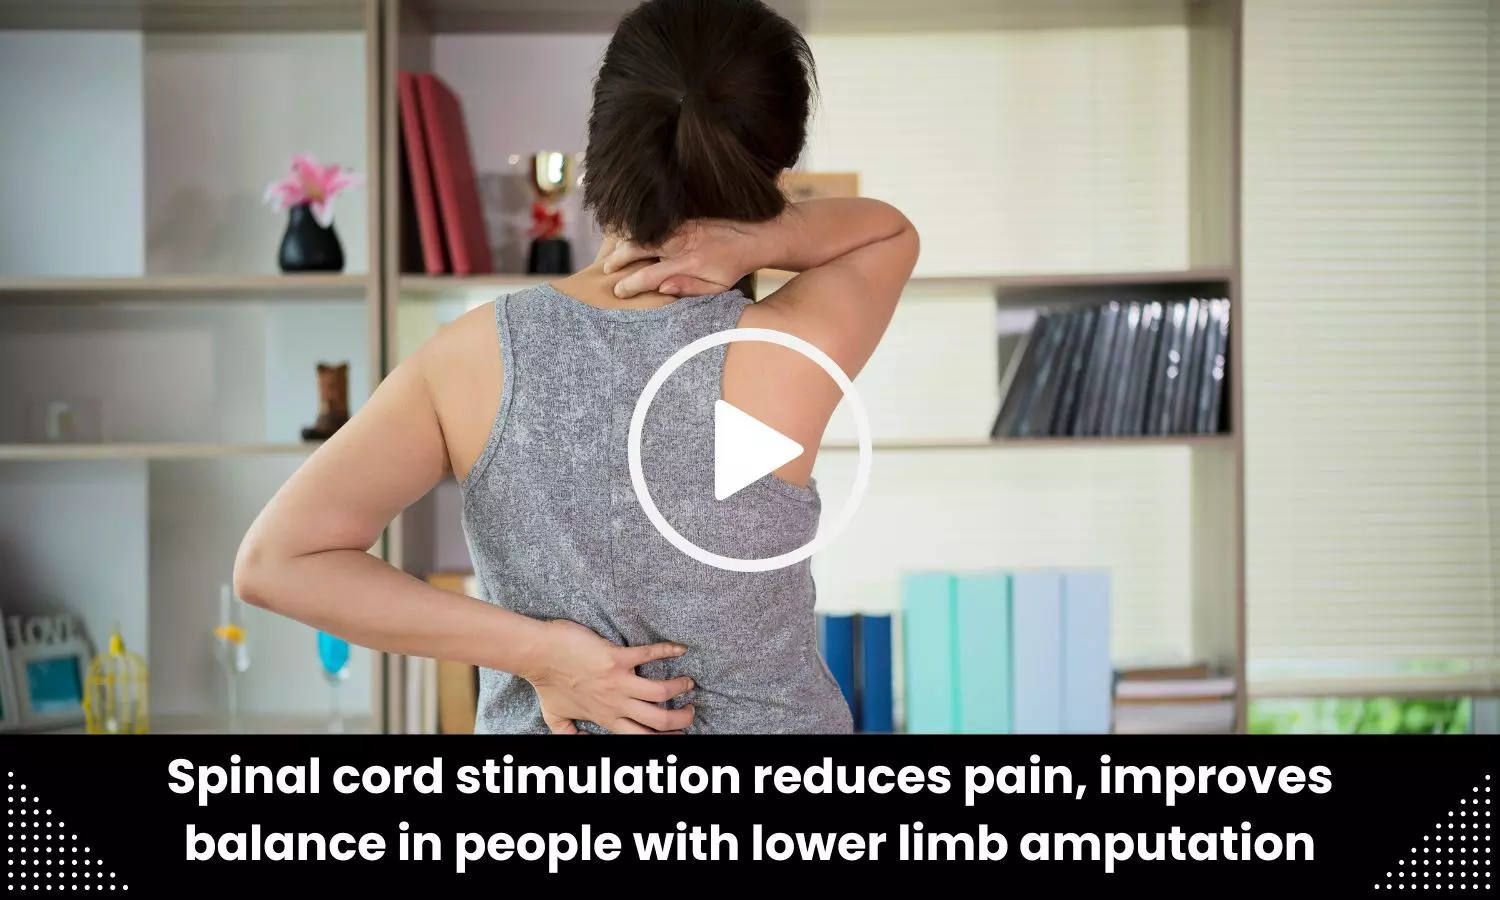 Spinal cord stimulation reduces pain, improves balance in people with lower limb amputation